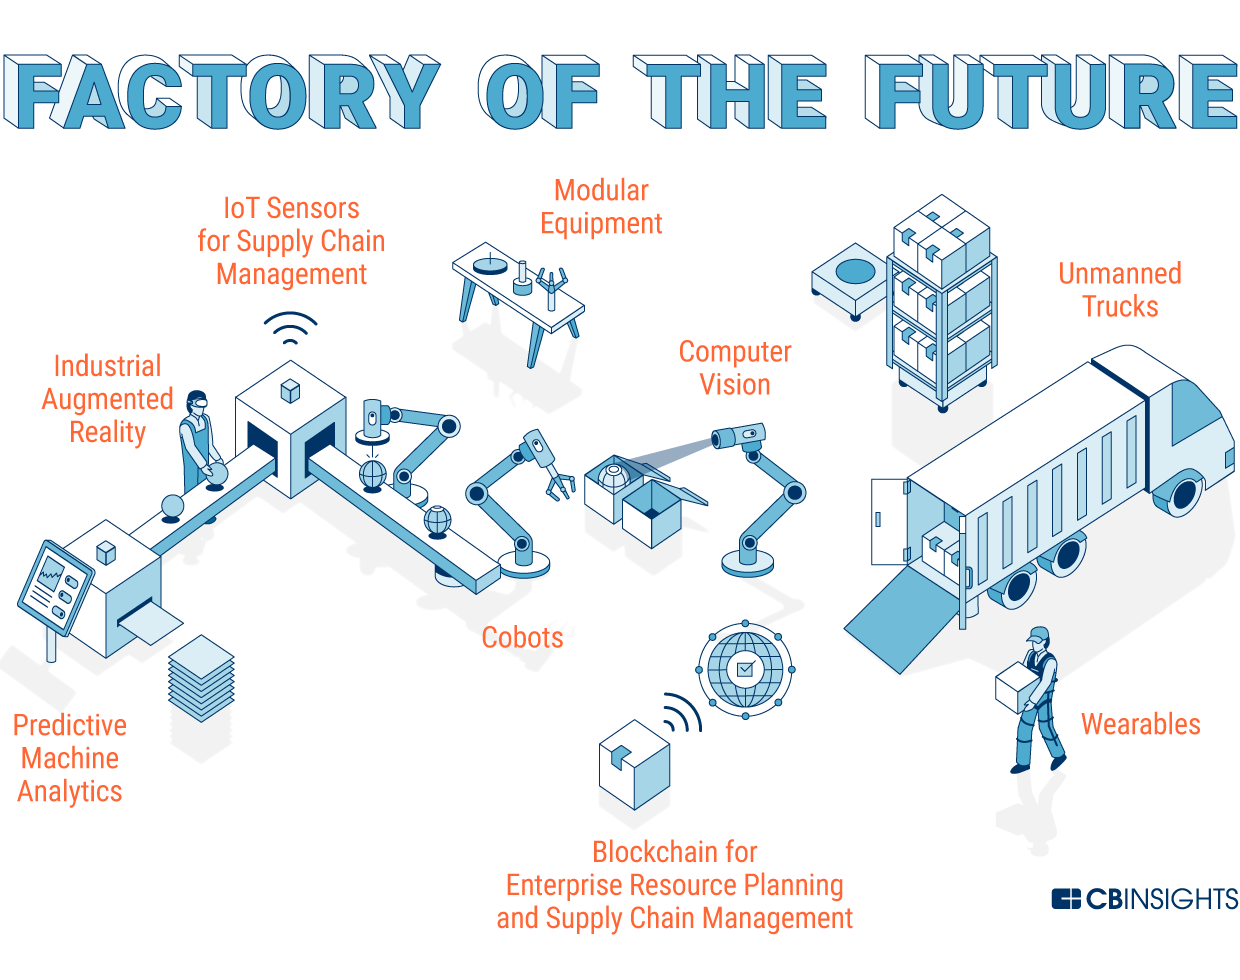 The Future of Manufacturing Technology l CB Insights